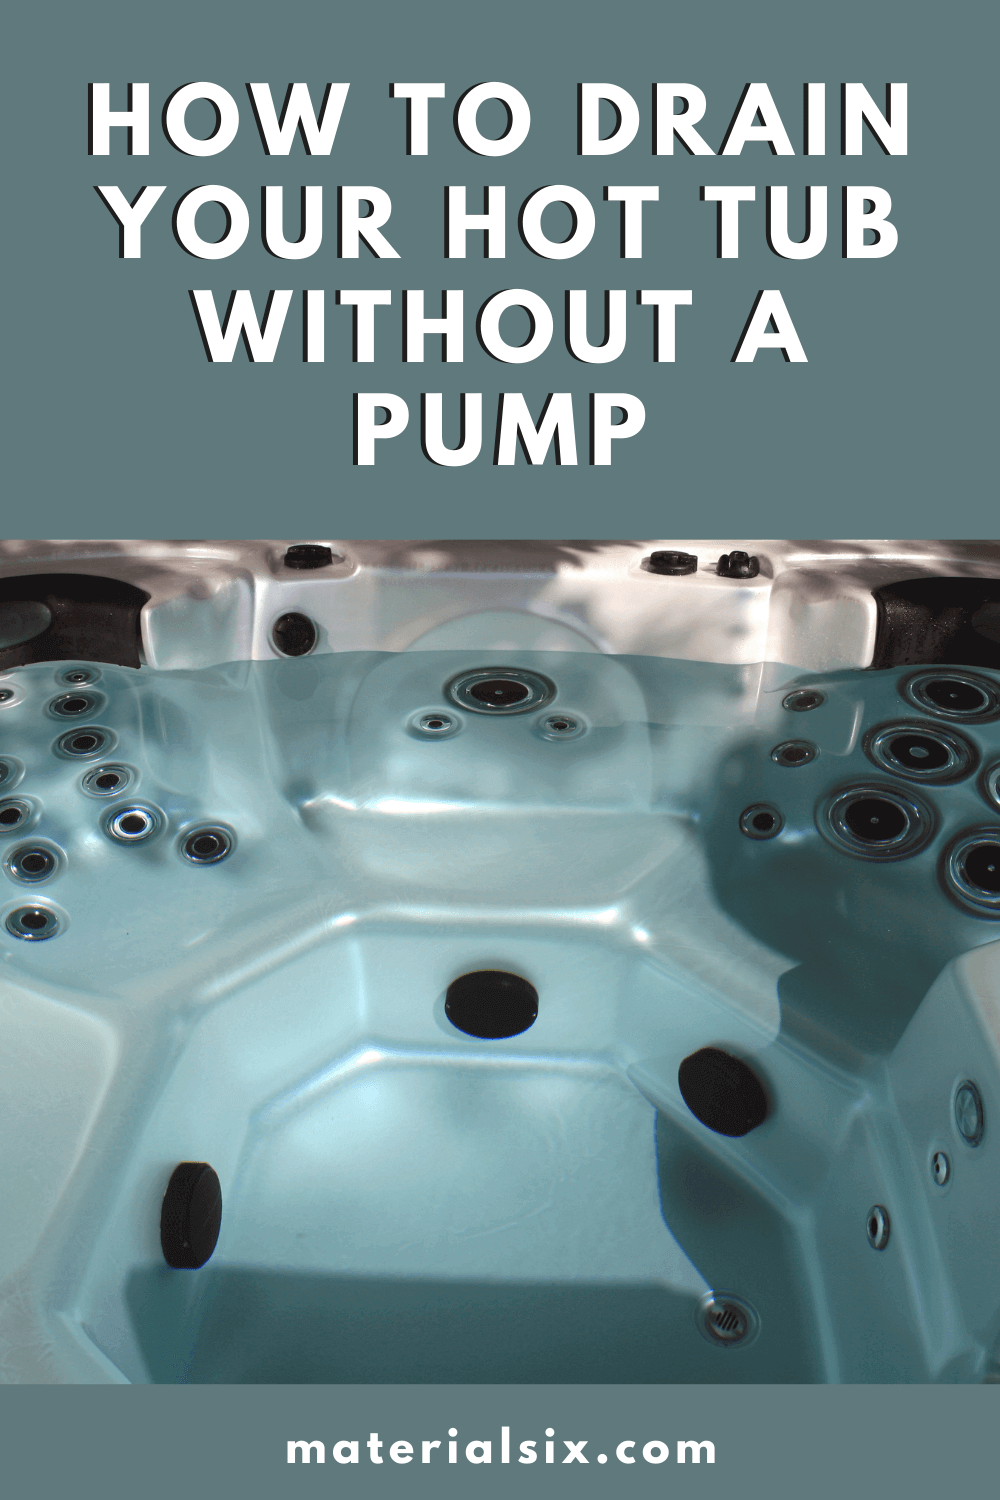 How to Drain Your Hot Tub Without a Pump 1